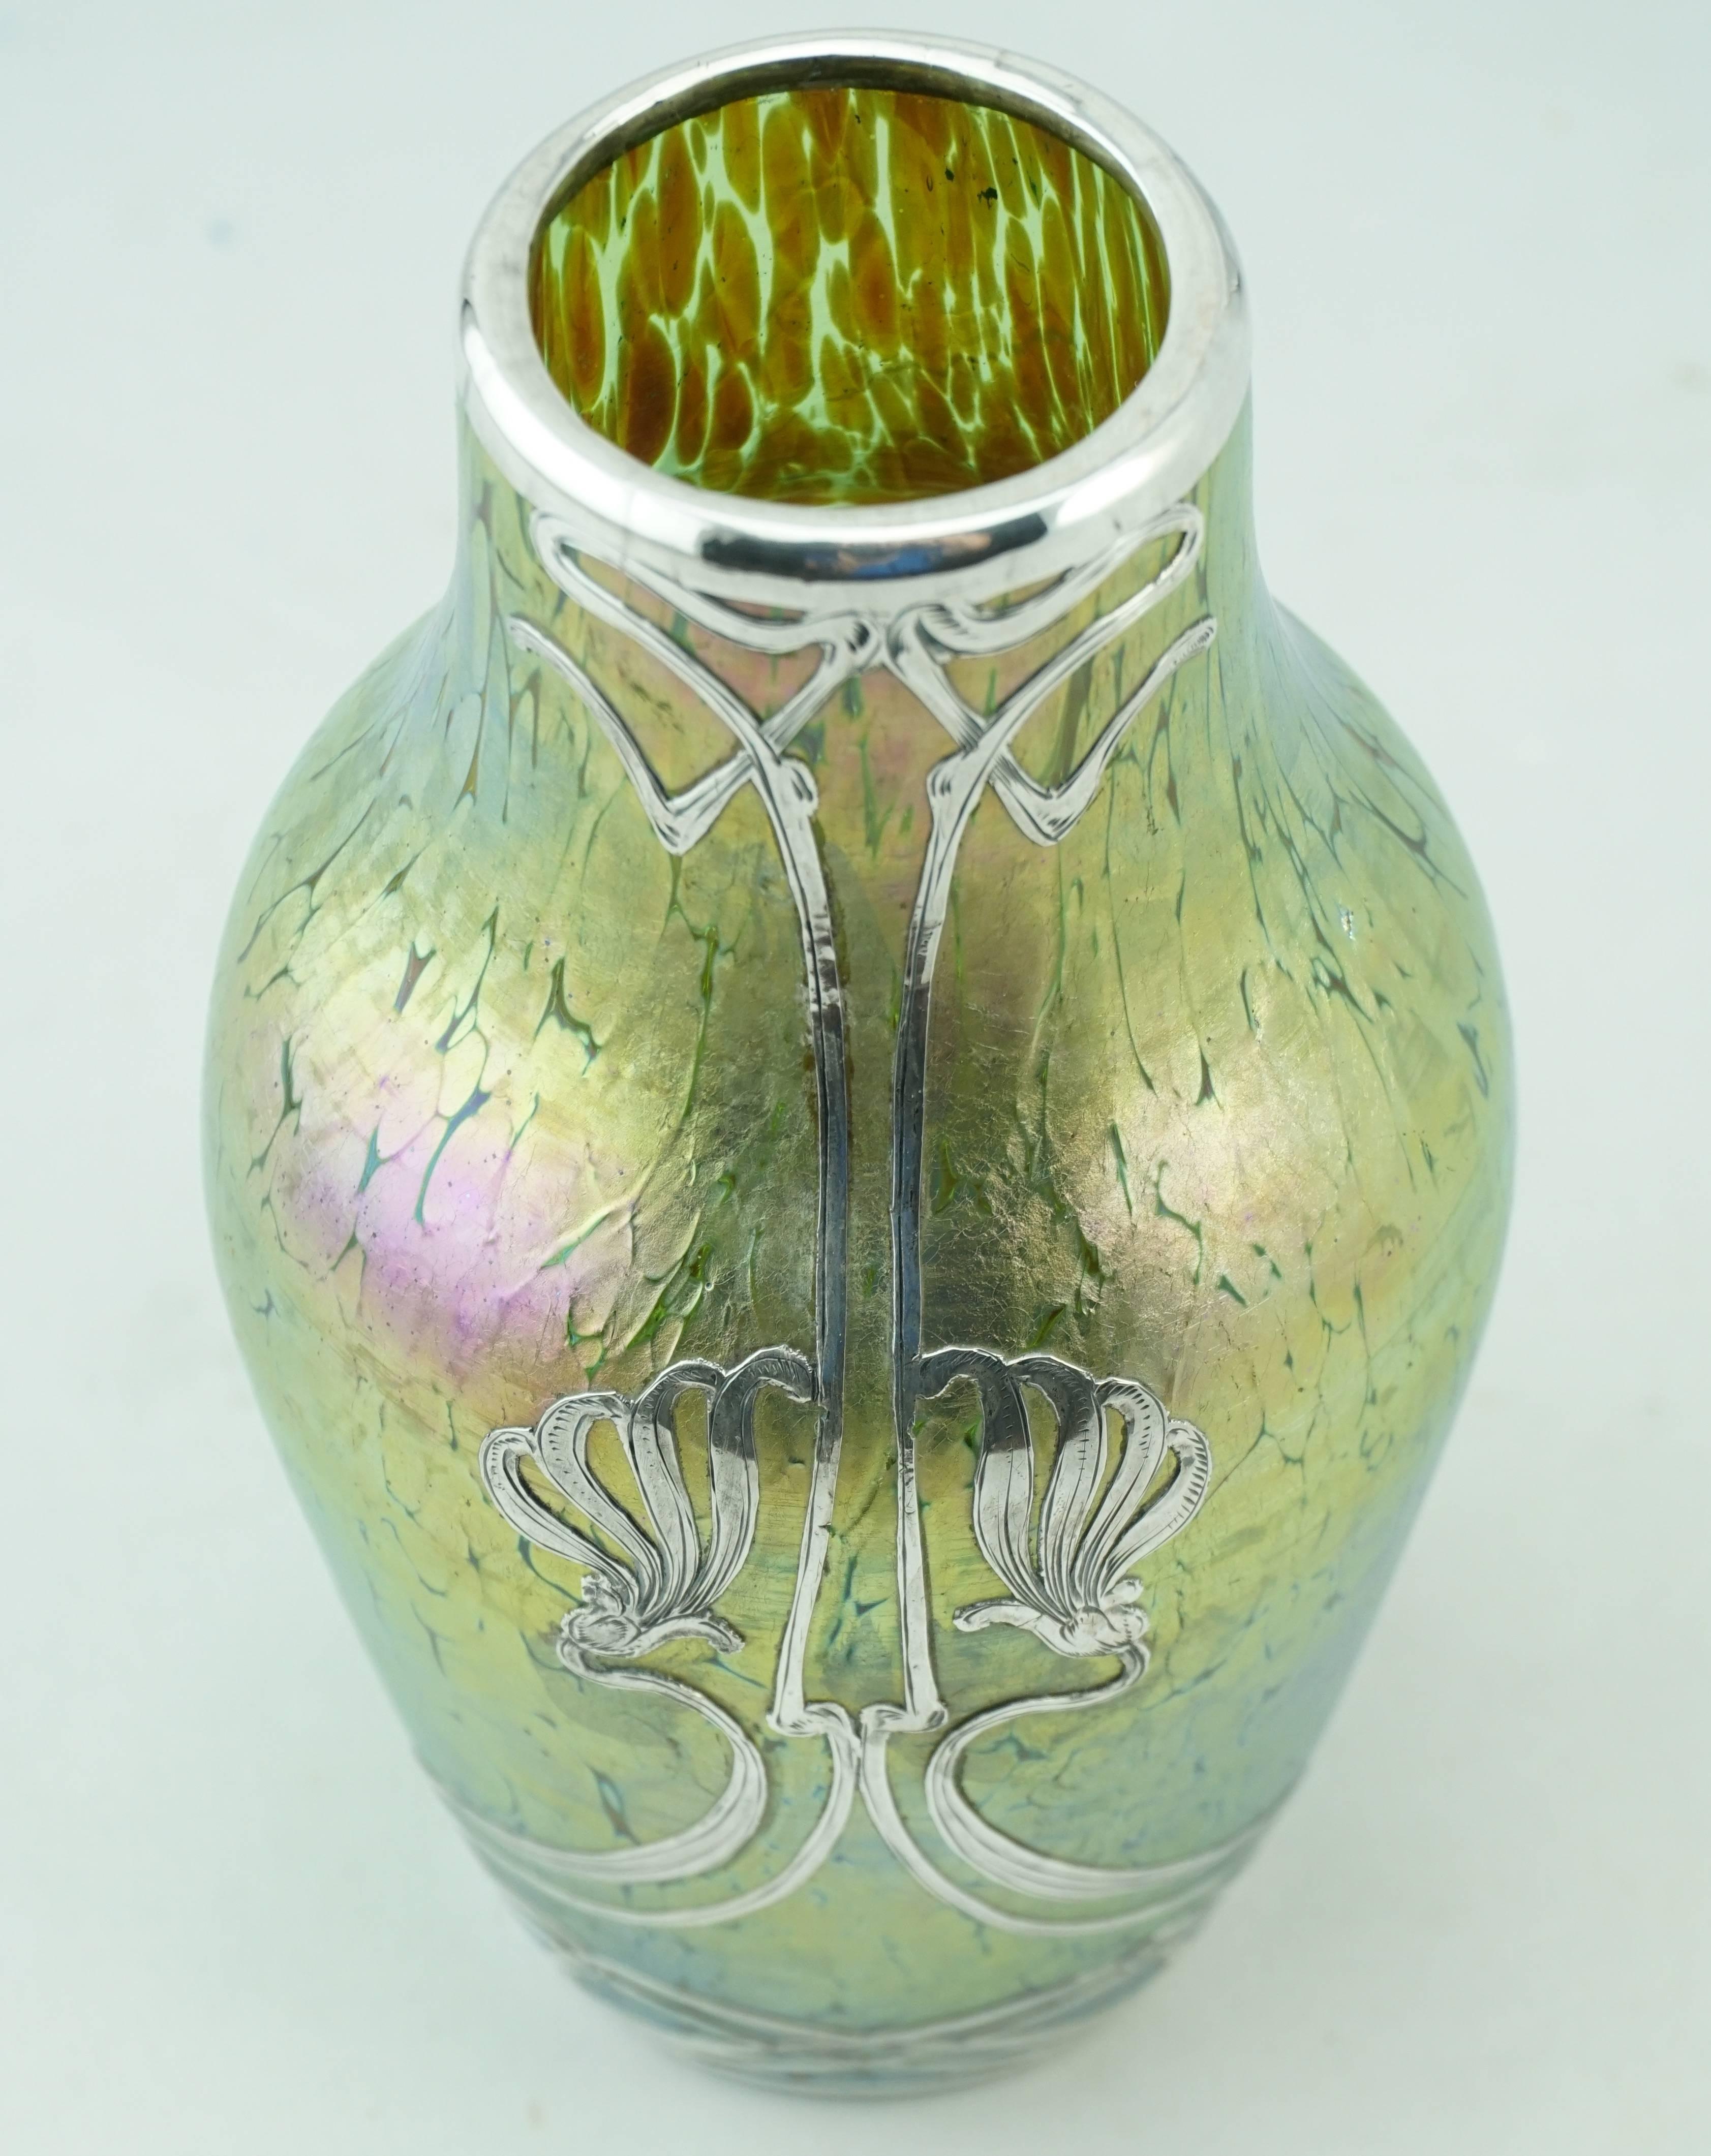 Loetz Crete papillon silver overlay Art Nouveau vase, circa 1900. Absolutely beautiful and charming oil spot Papillon vase in perfect condition and a proportionate size of 5.5 inches. Those of you now salivating over this vase know that pictures